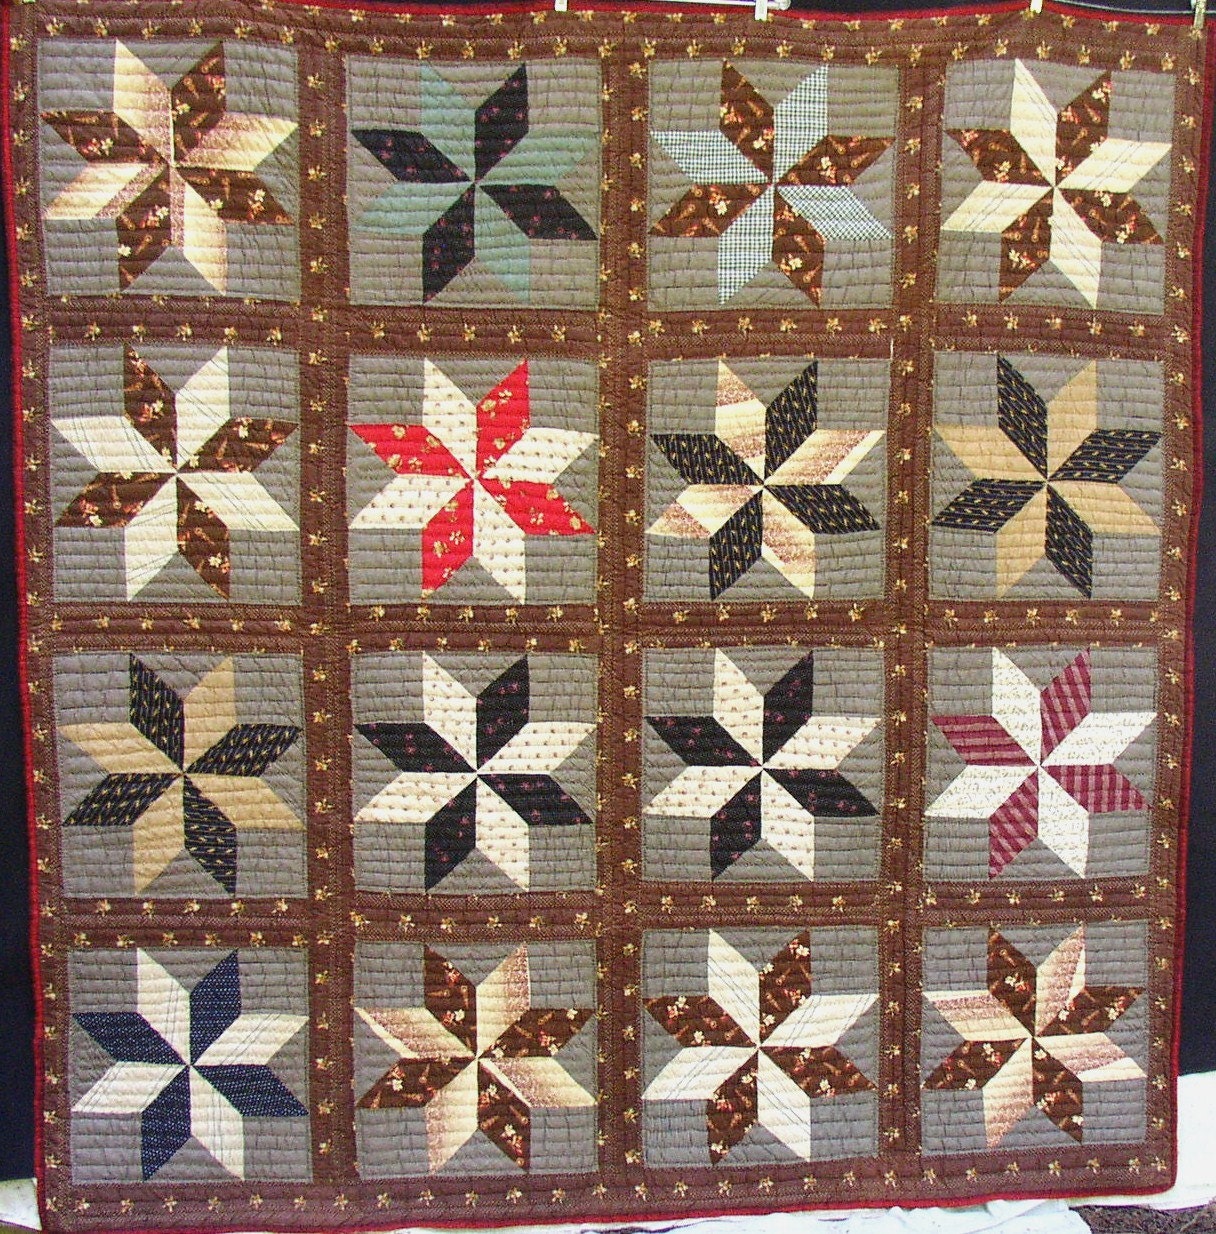 1890 s VINTAGE STAR QUILT, Graphic, Gorgeous,  Brown, Red, Black, hand sewn, homespun back, fab fabrics